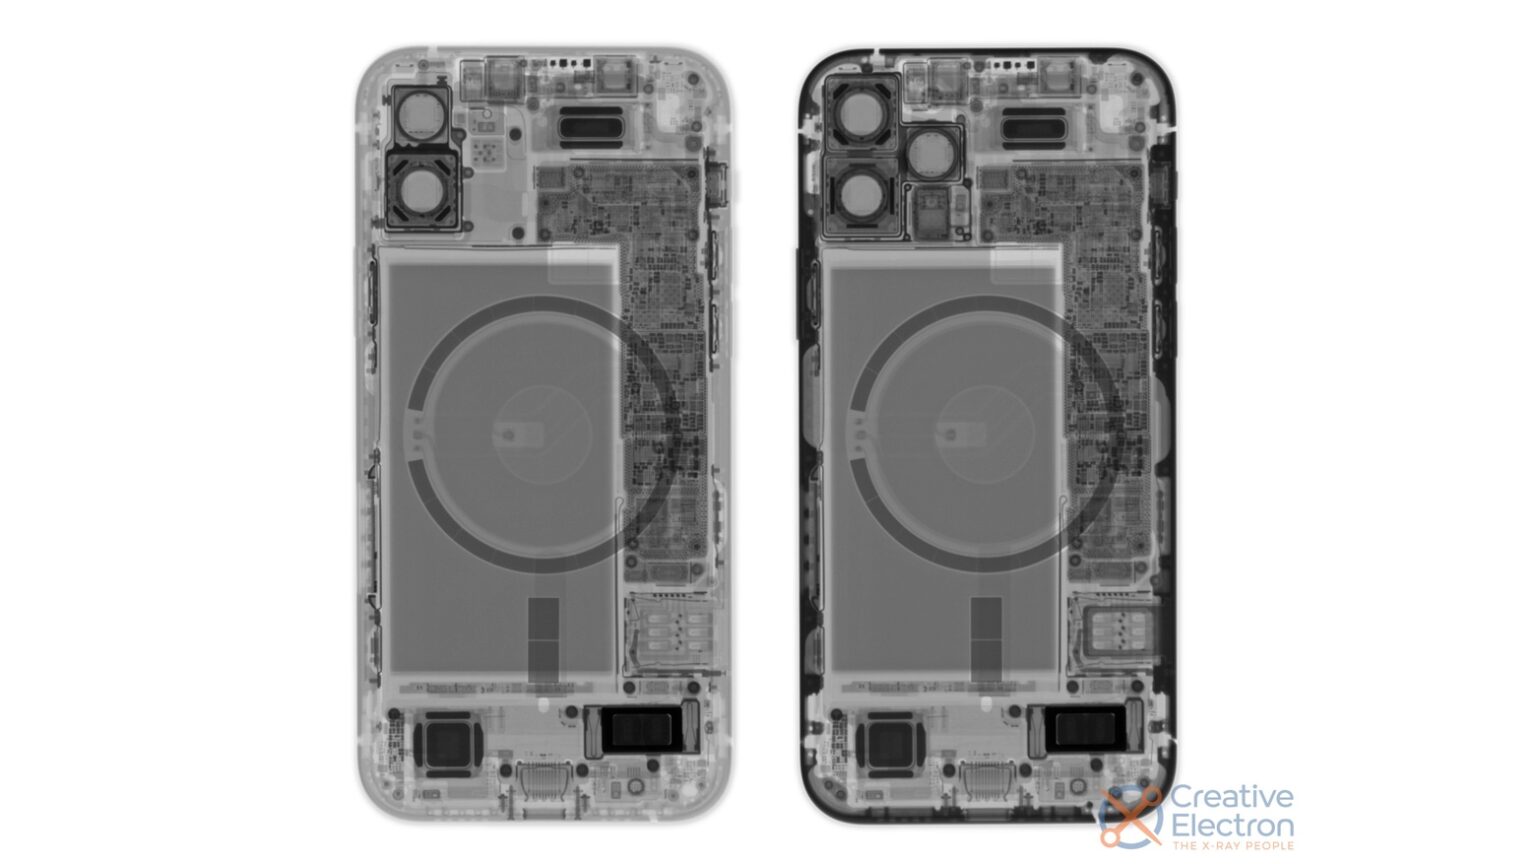 An iPhone 12 teardown wouldn’t be complete without a cool X-ray.